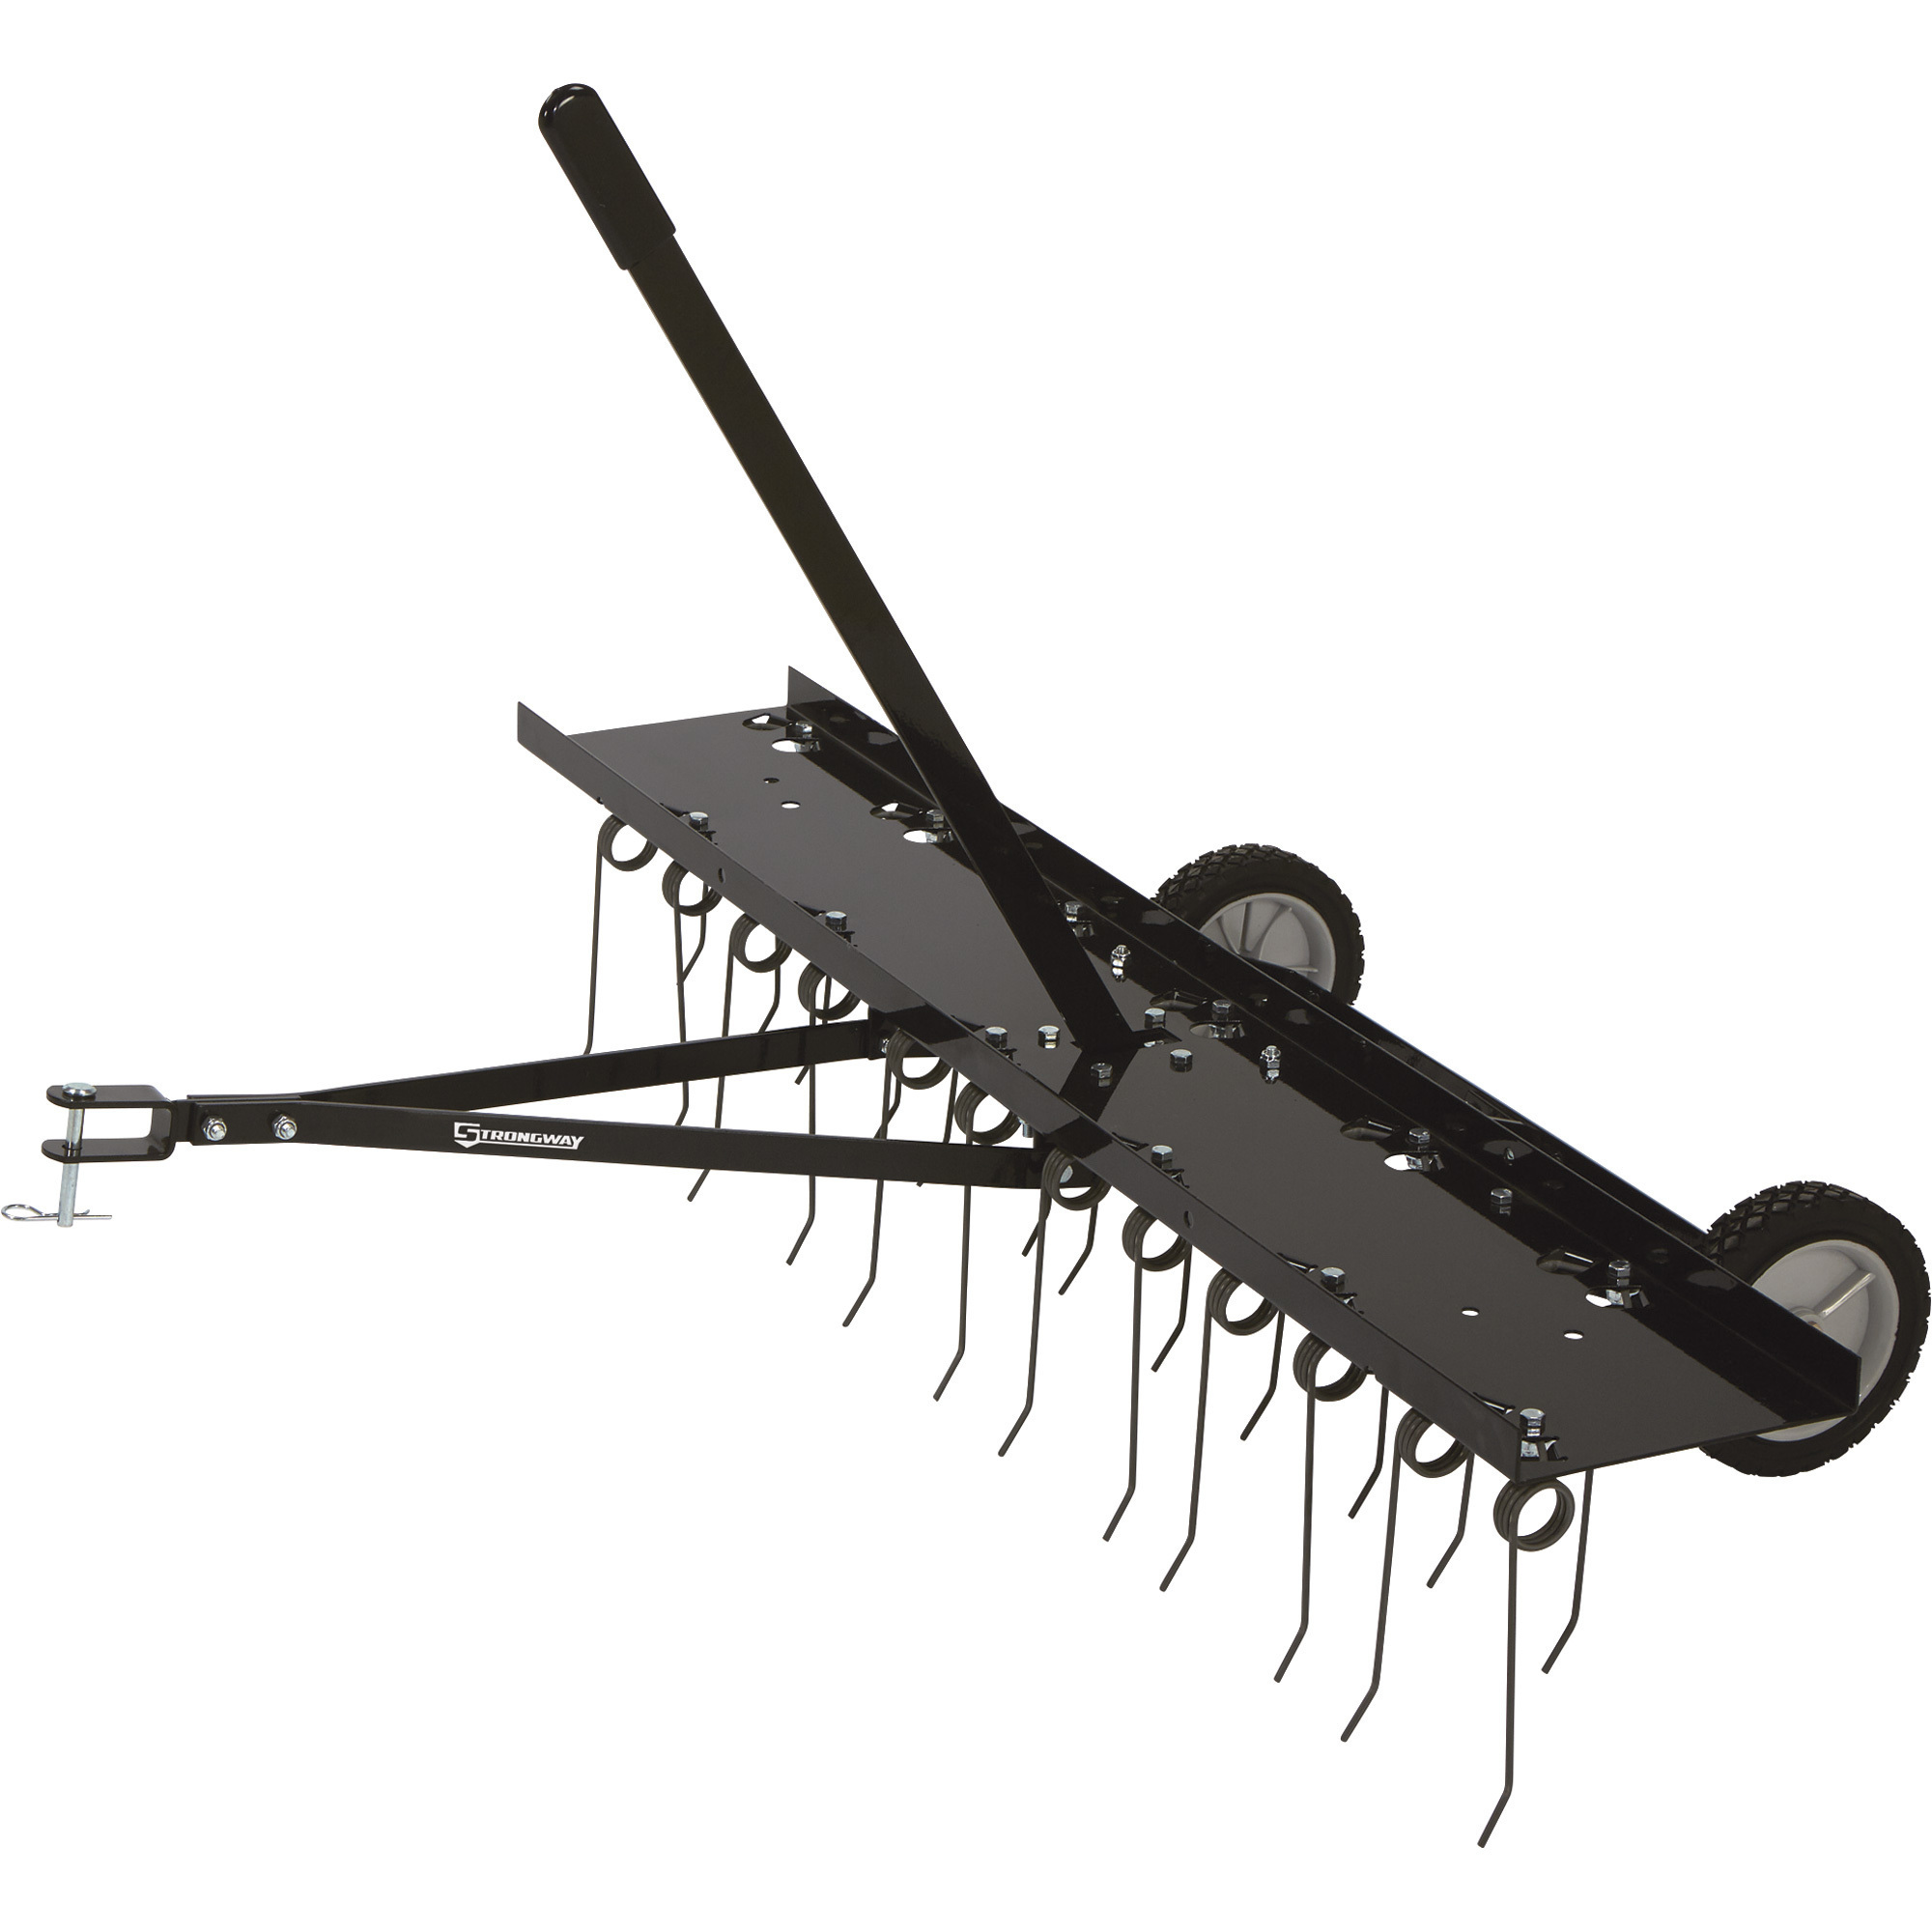  Ron Marsh's Heavy Duty J Hook Tool with Wire Cutter Traps  Trapping Snaring : Patio, Lawn & Garden